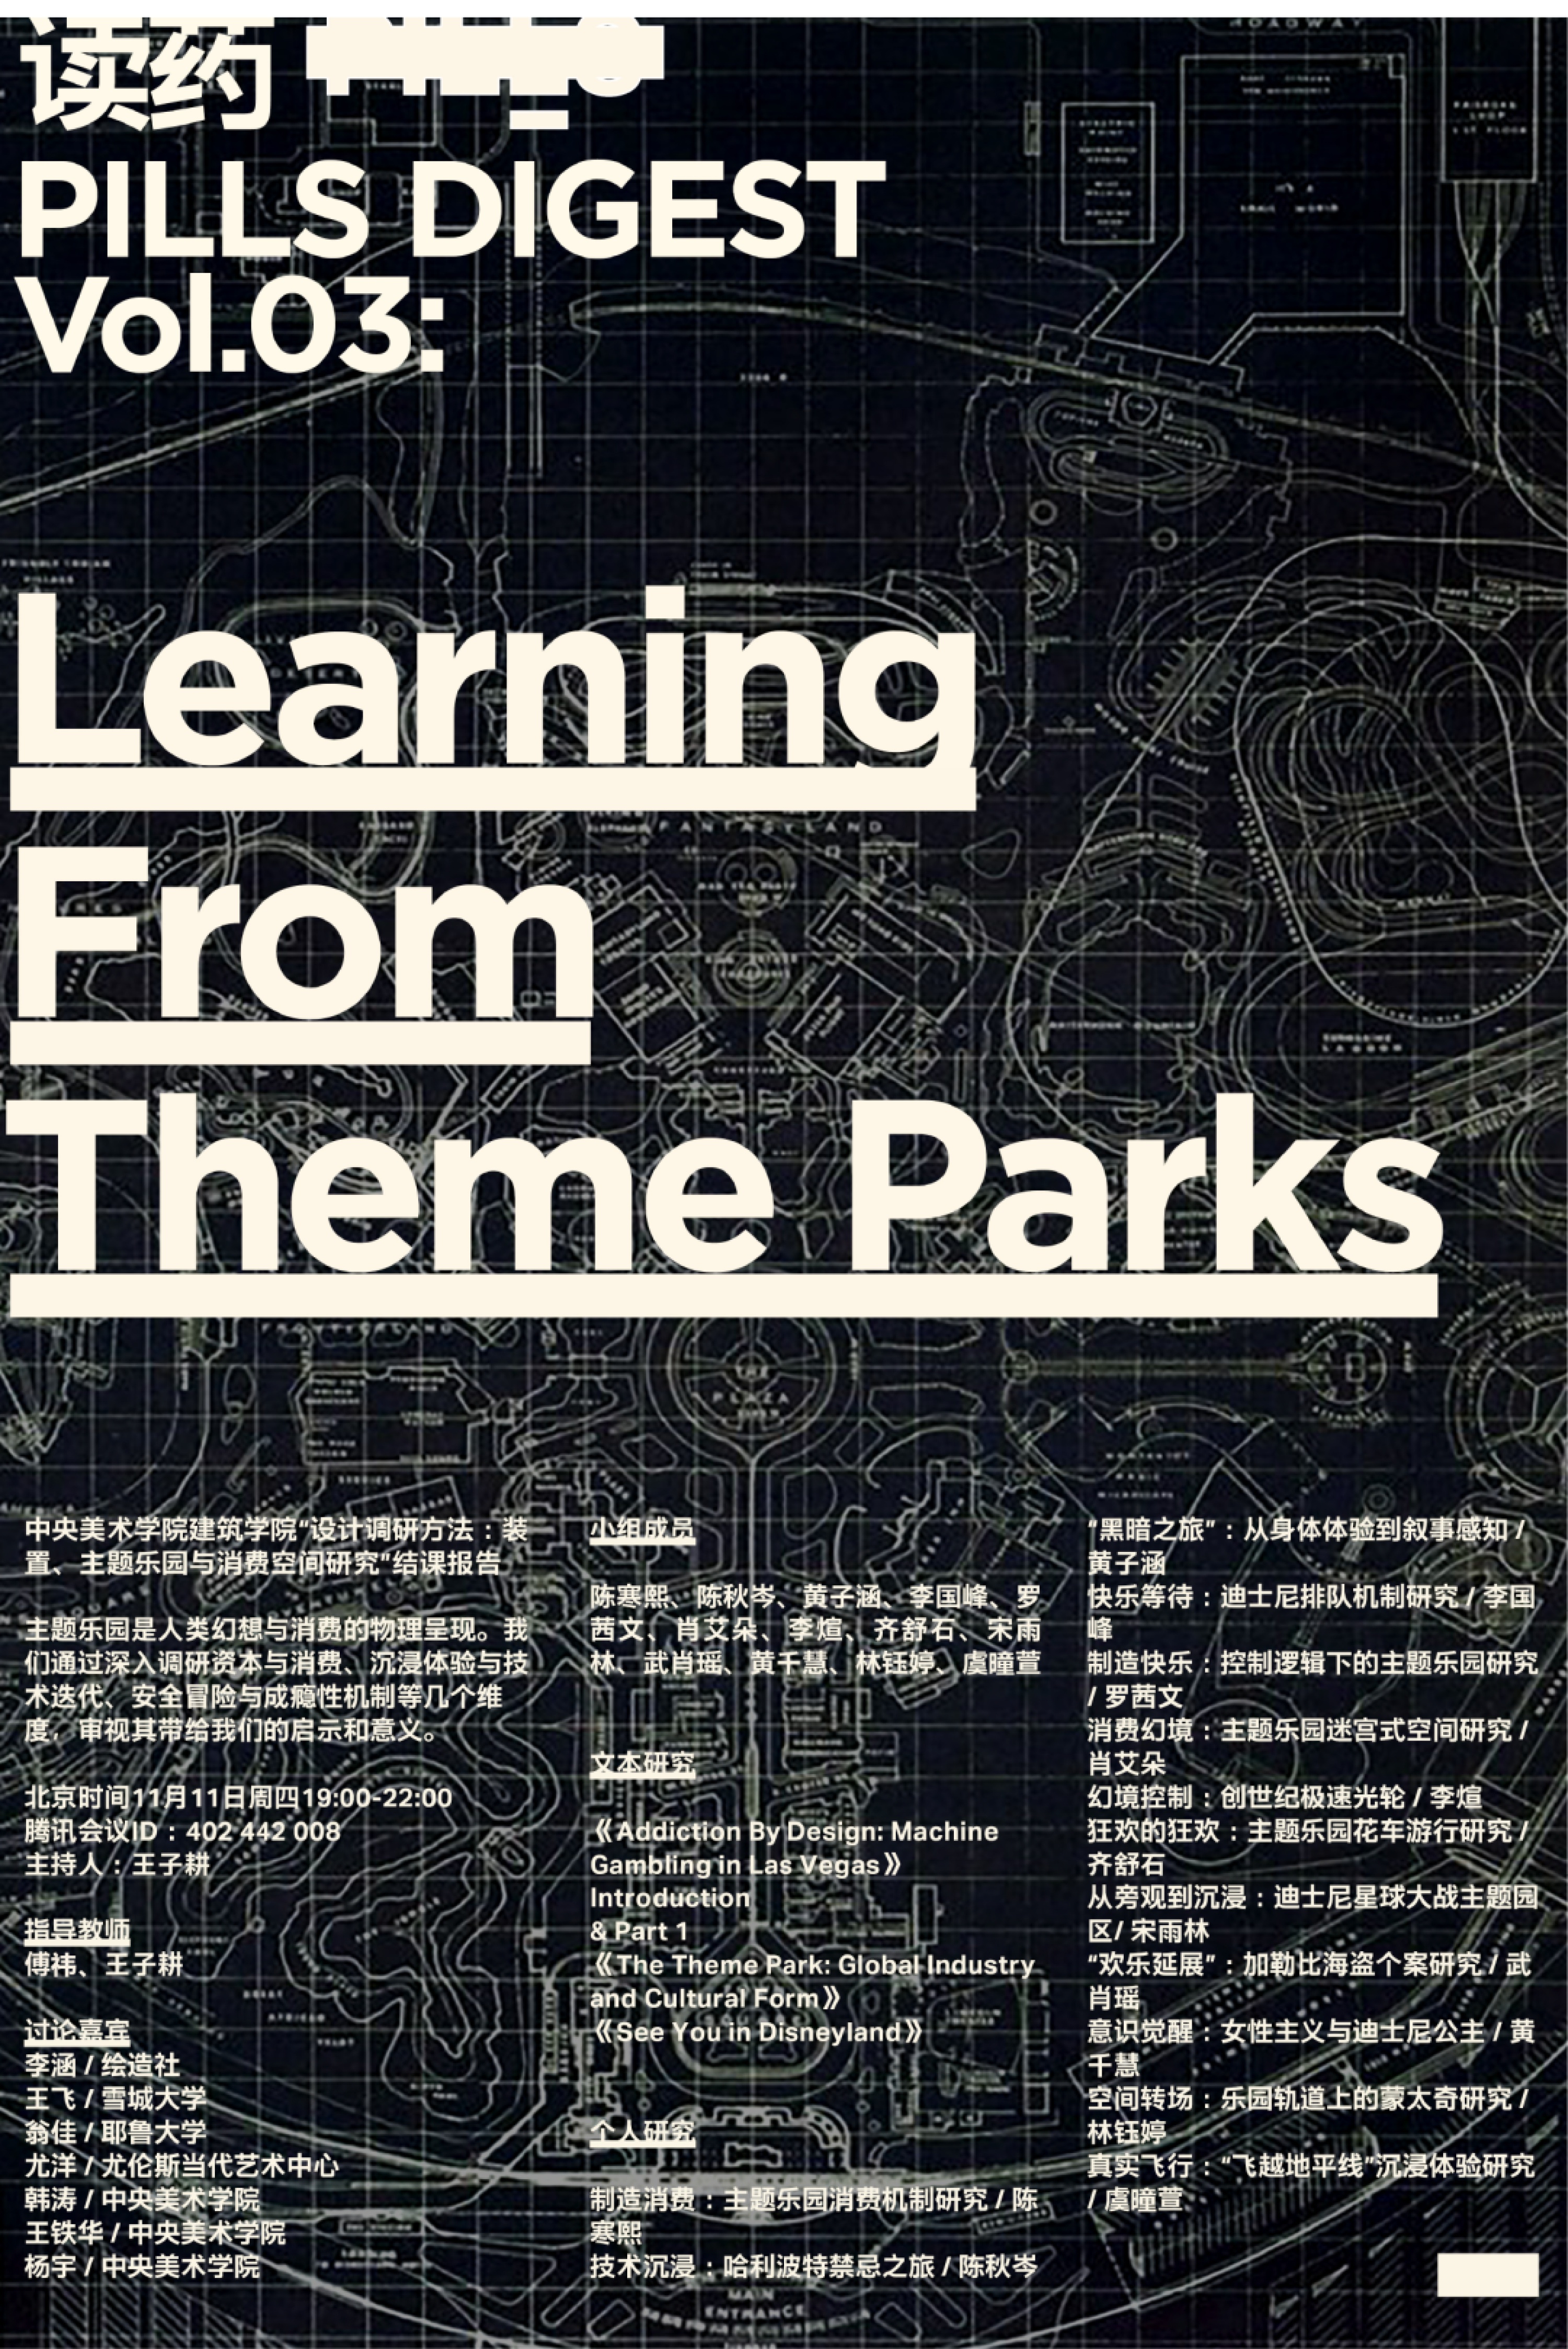 PILLS Held Reading Activity PILLS Digest Vol.03 “Learning From Theme Parks"